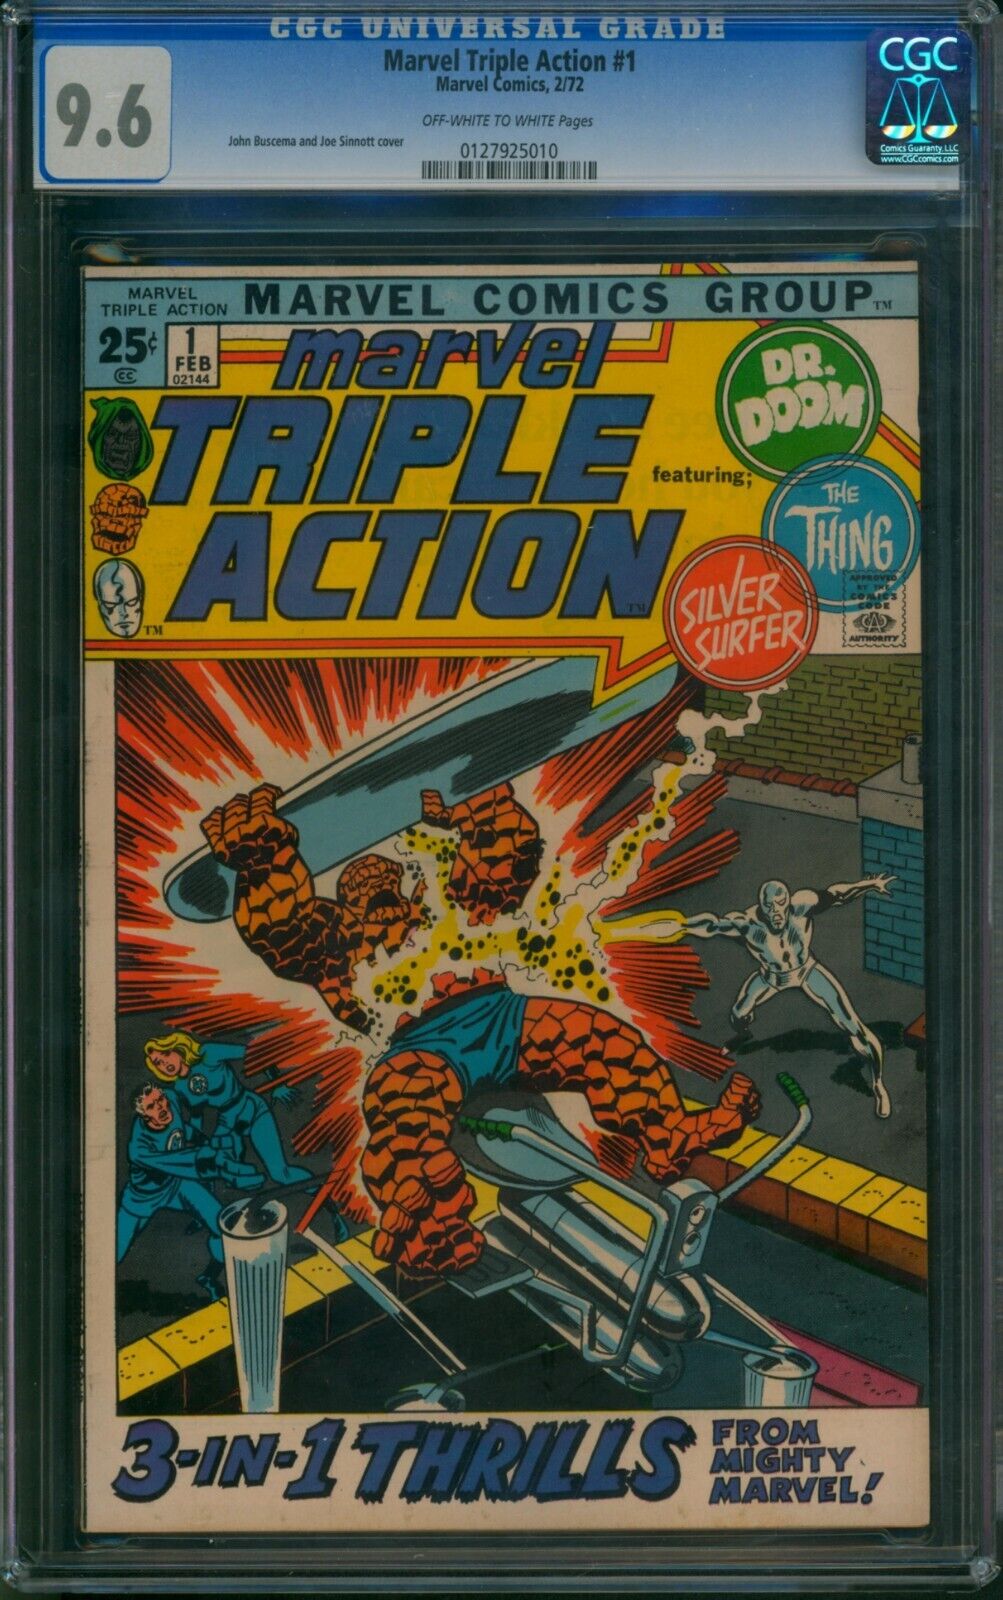 Marvel Triple Action #1 ⭐ CGC 9.6 ⭐ Thing Silver Surfer & Dr. Doom Comic 1972